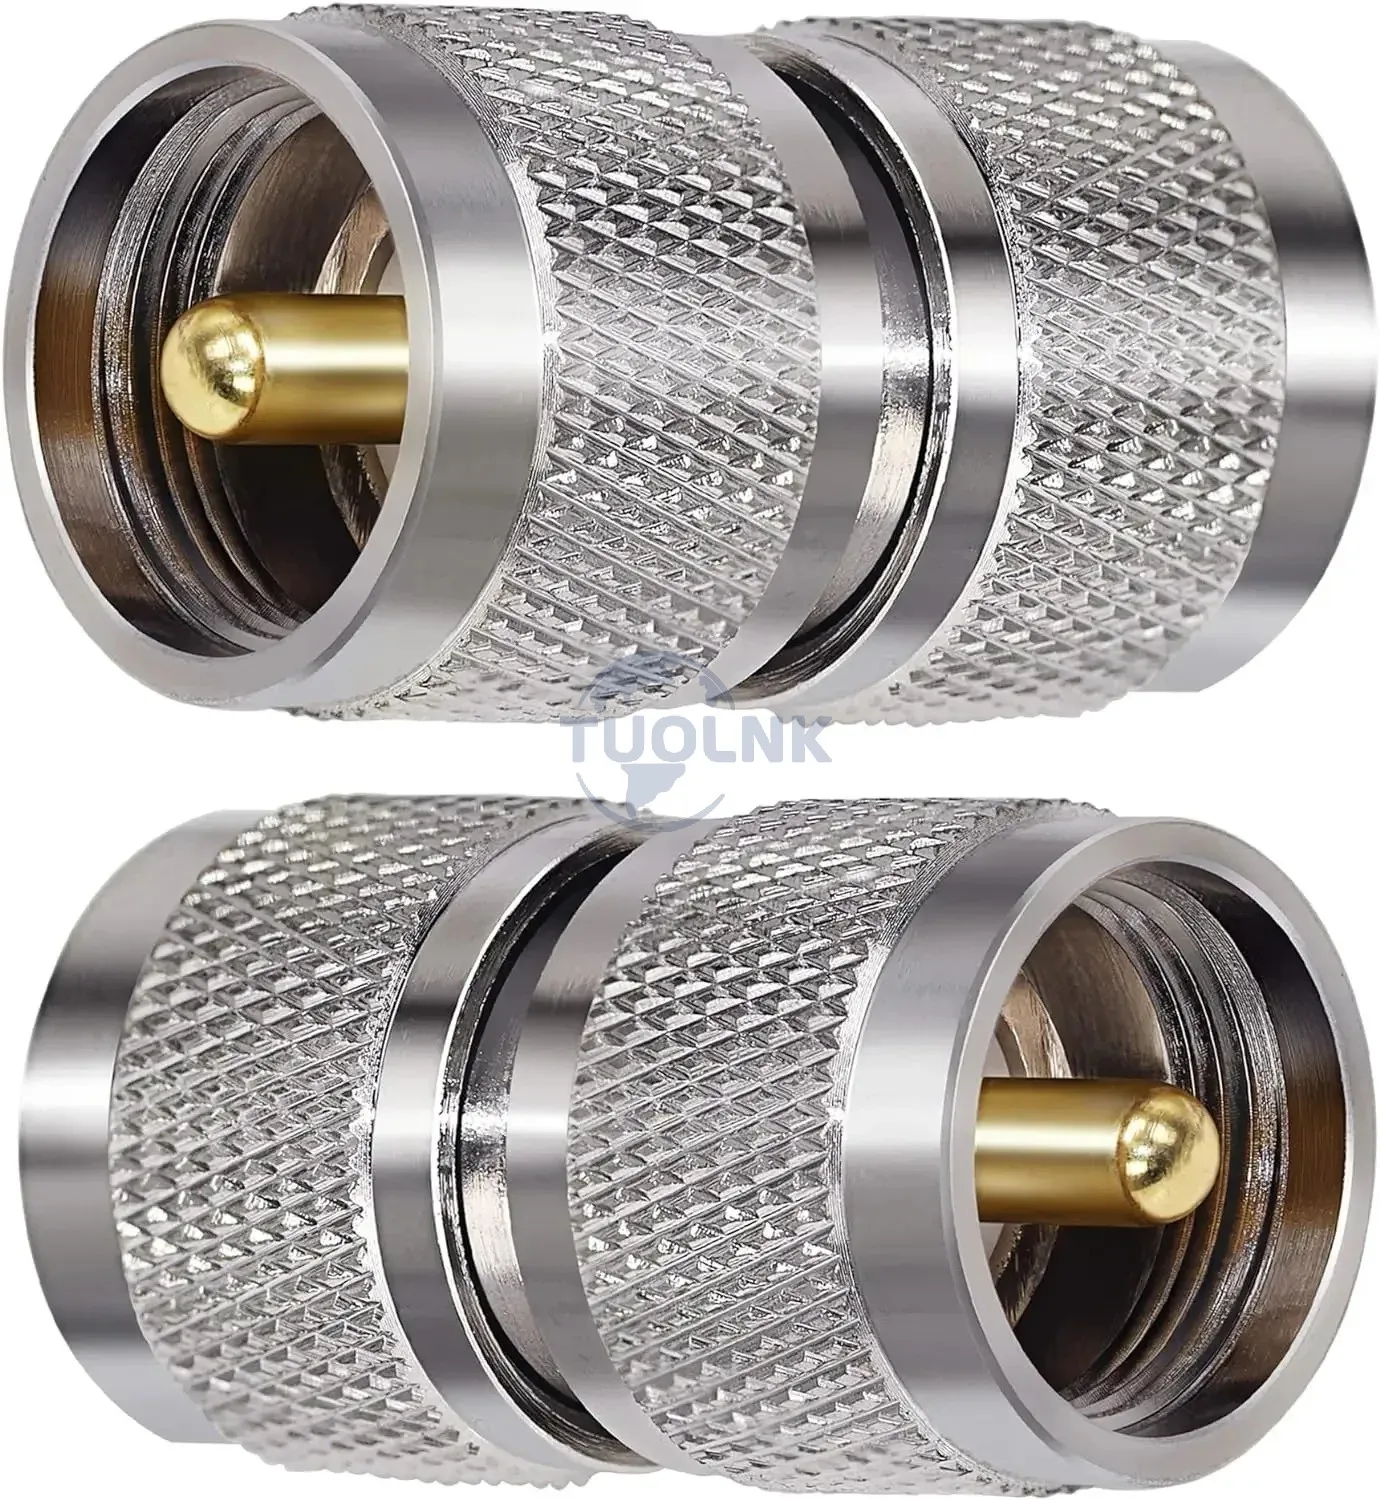 UHF Coax Connector PL259 UHF Male to UHF Male Coaxial Adapter PL-259 Connector for Extension Cable 2pcs